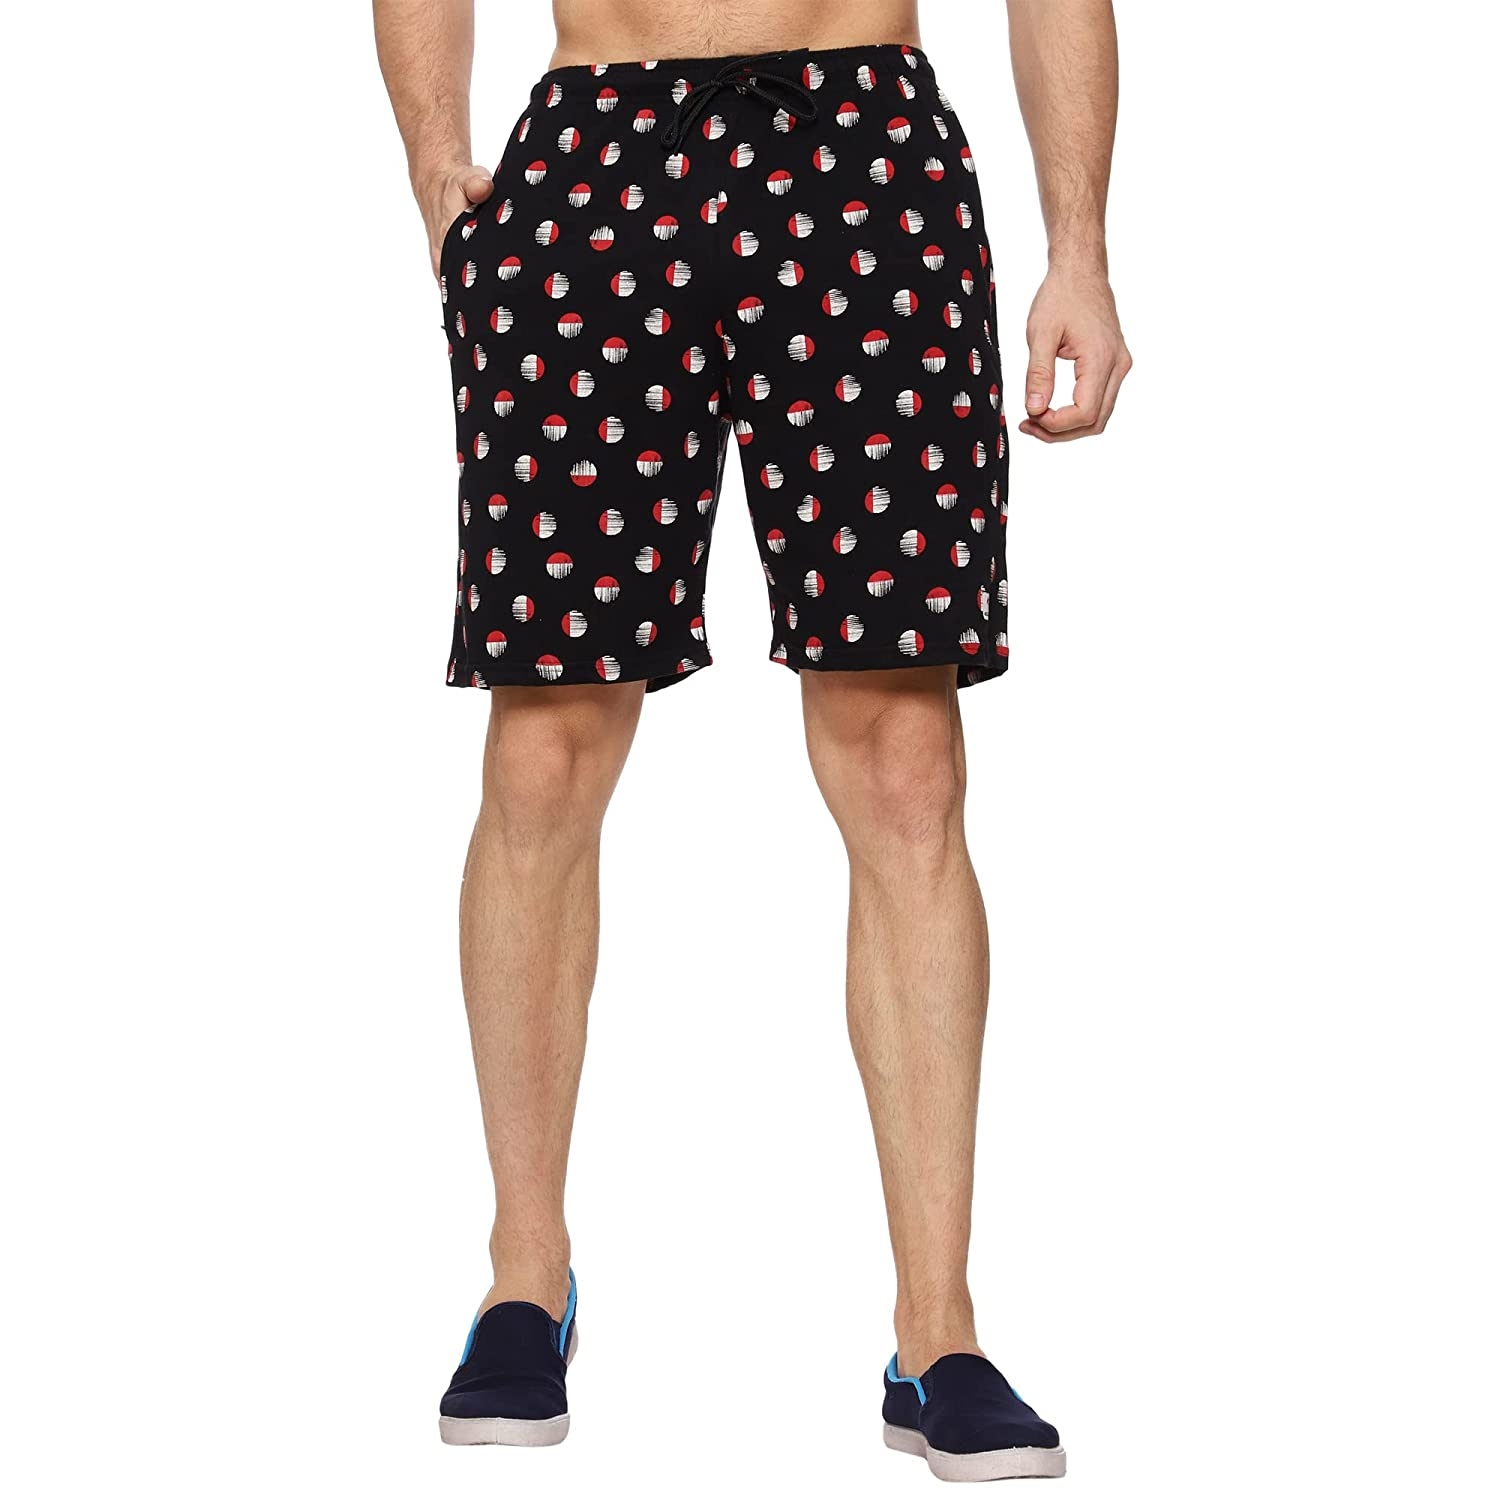 Moovfree Mens Cotton Bermuda Printed Casual Shorts Regular Fit Lounge Shorts with Zip Pockets, Red and White Circle on Black 